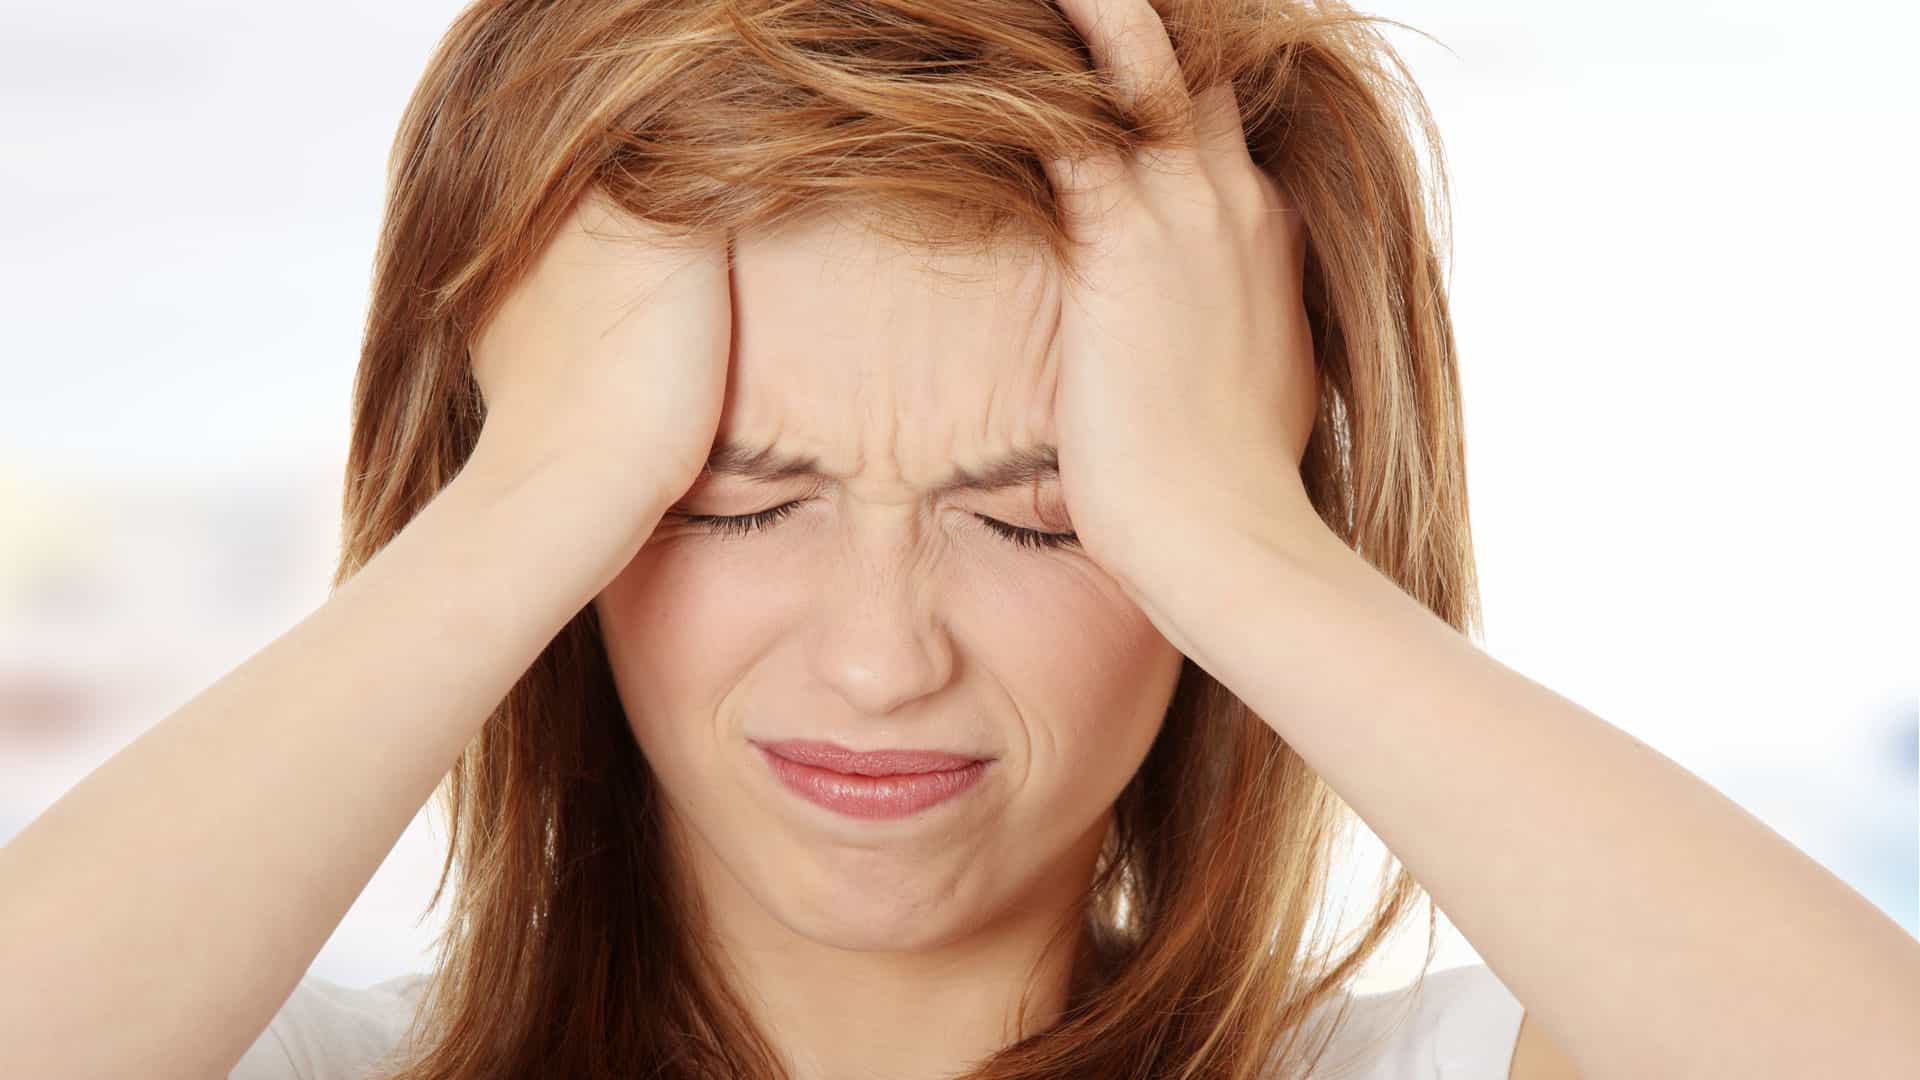 The Link Between Coughing and Headaches